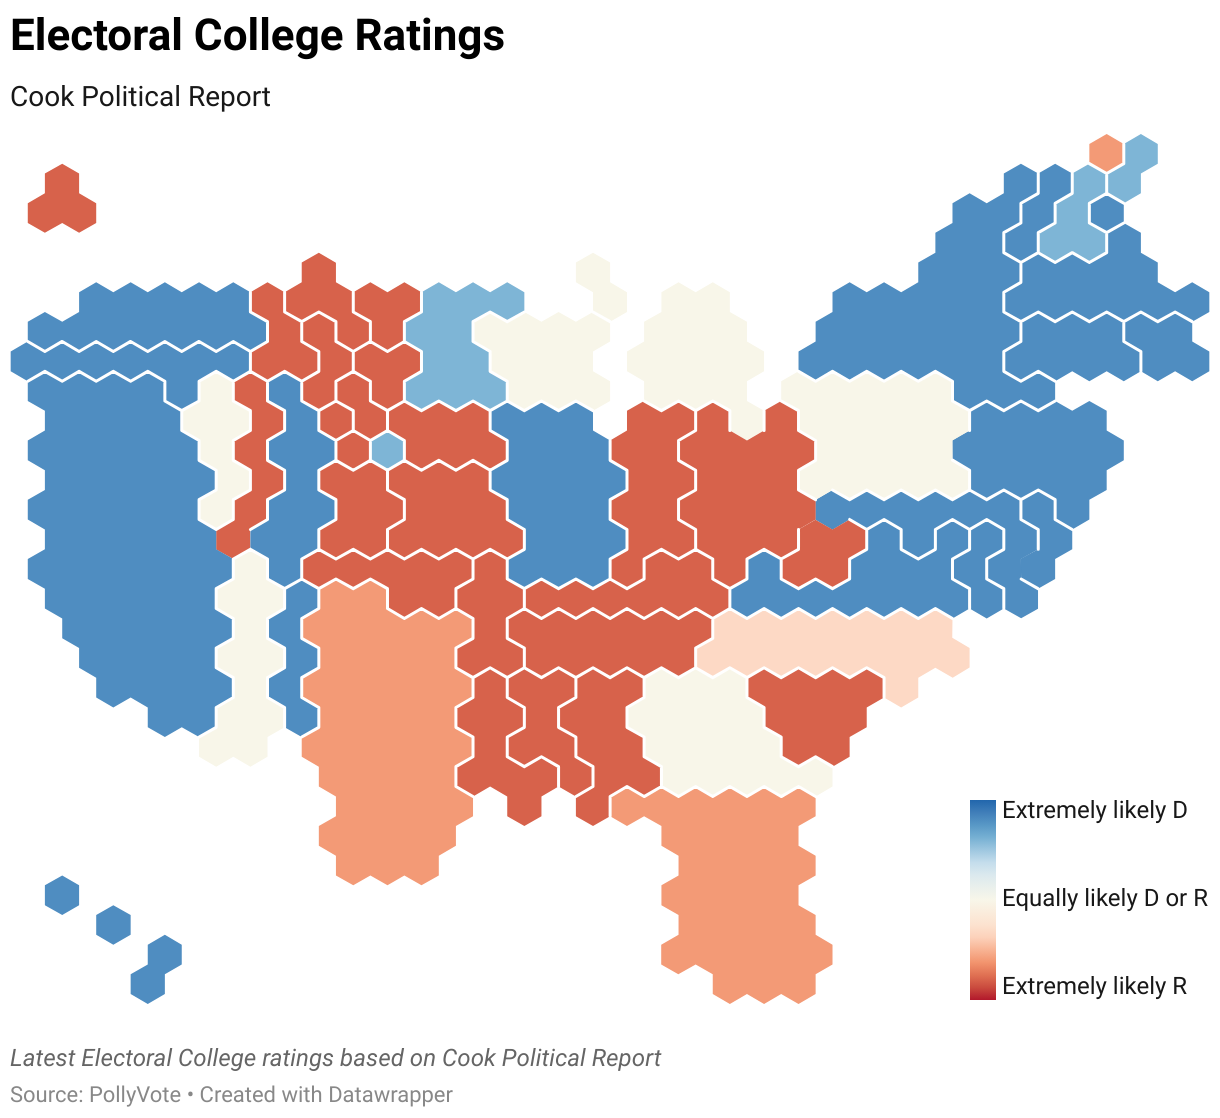 Latest Electoral College ratings based on Cook Political Report